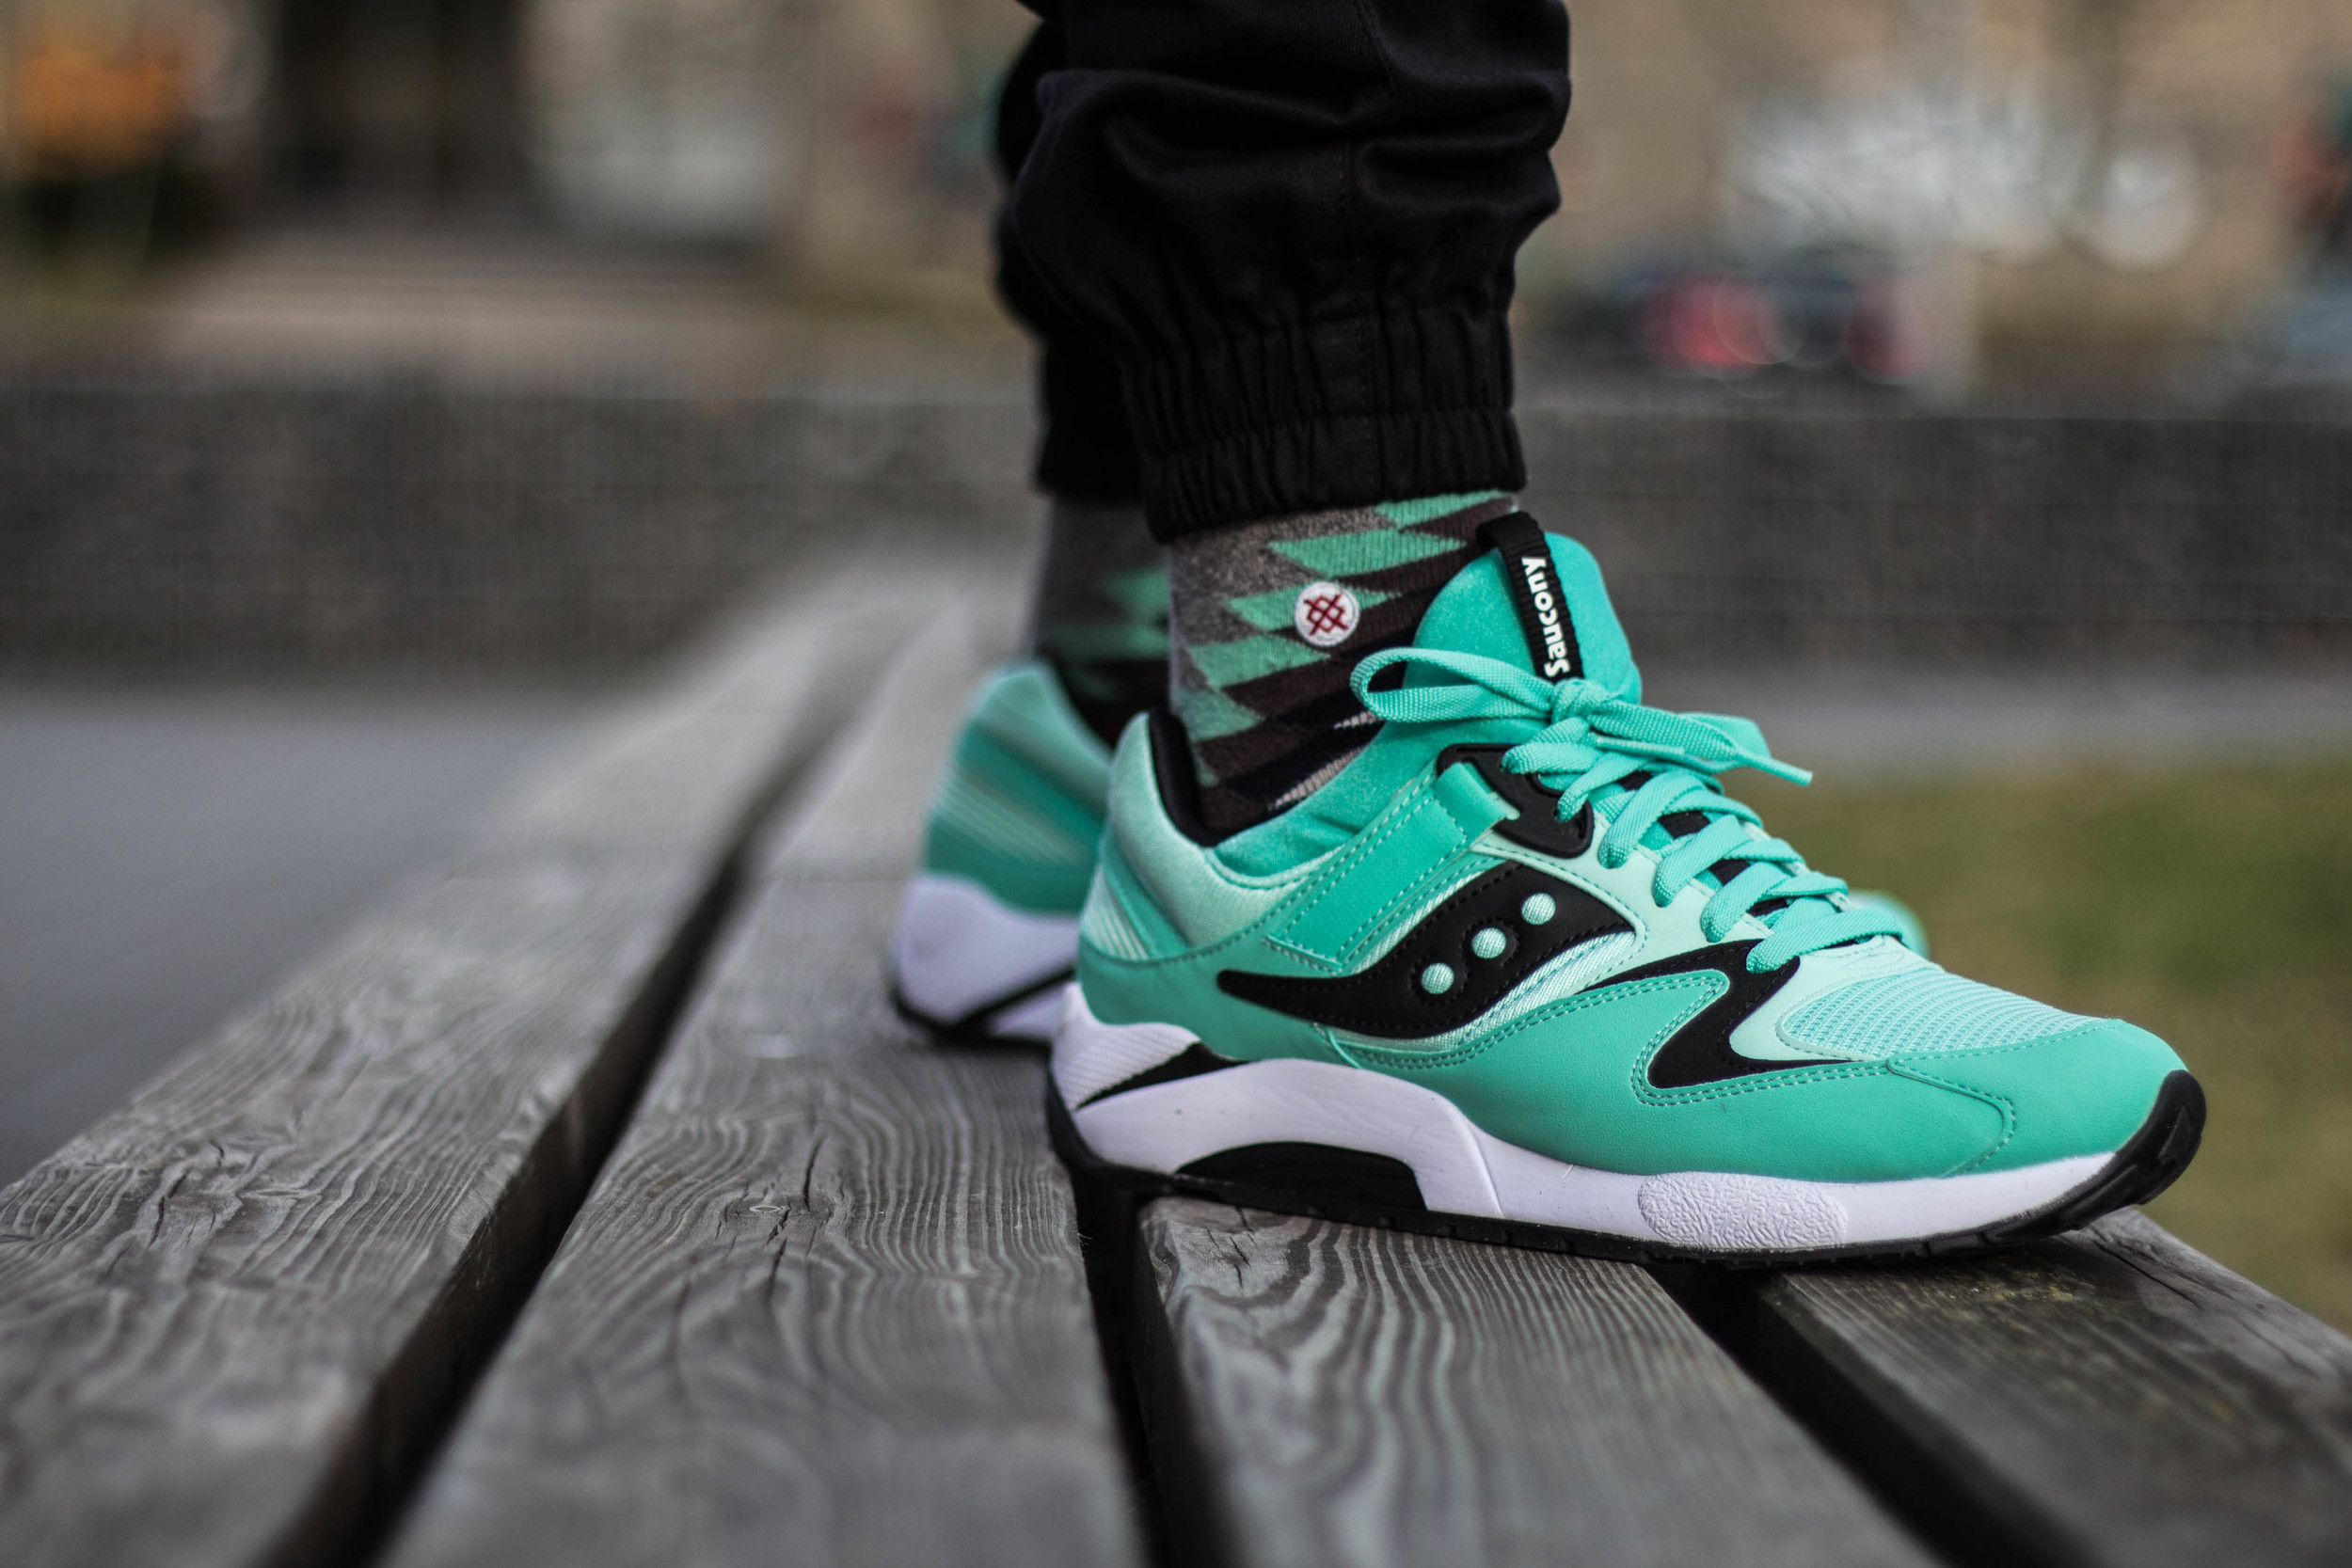 Deal of the Day: Saucony GRID 9000 \